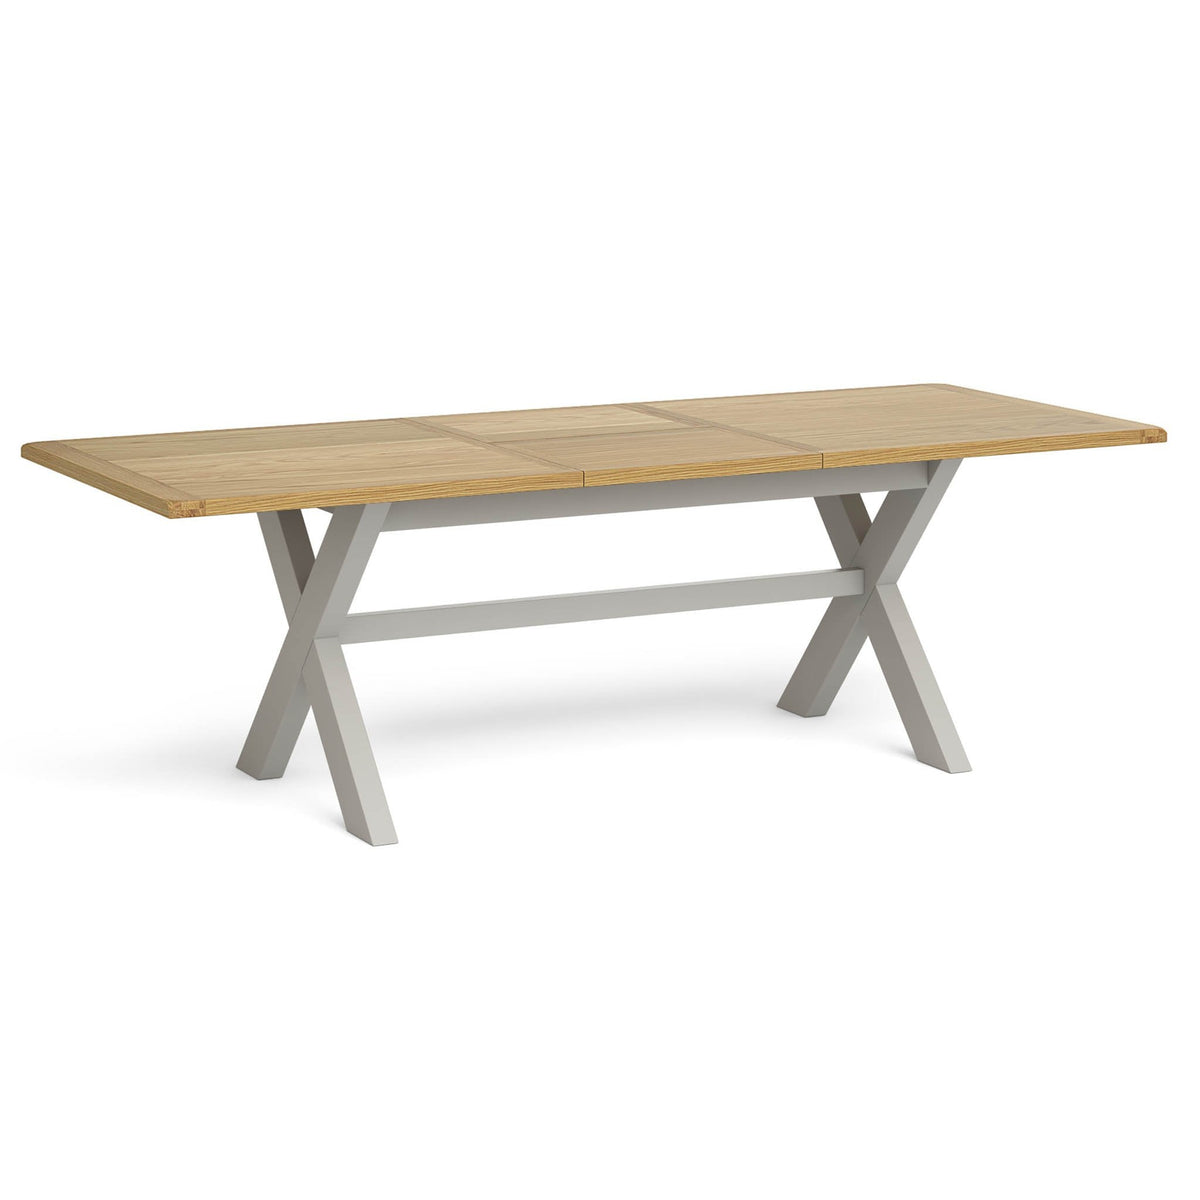 Lundy Grey Cross legged Extending Dining Table with Oak Top - Extended view